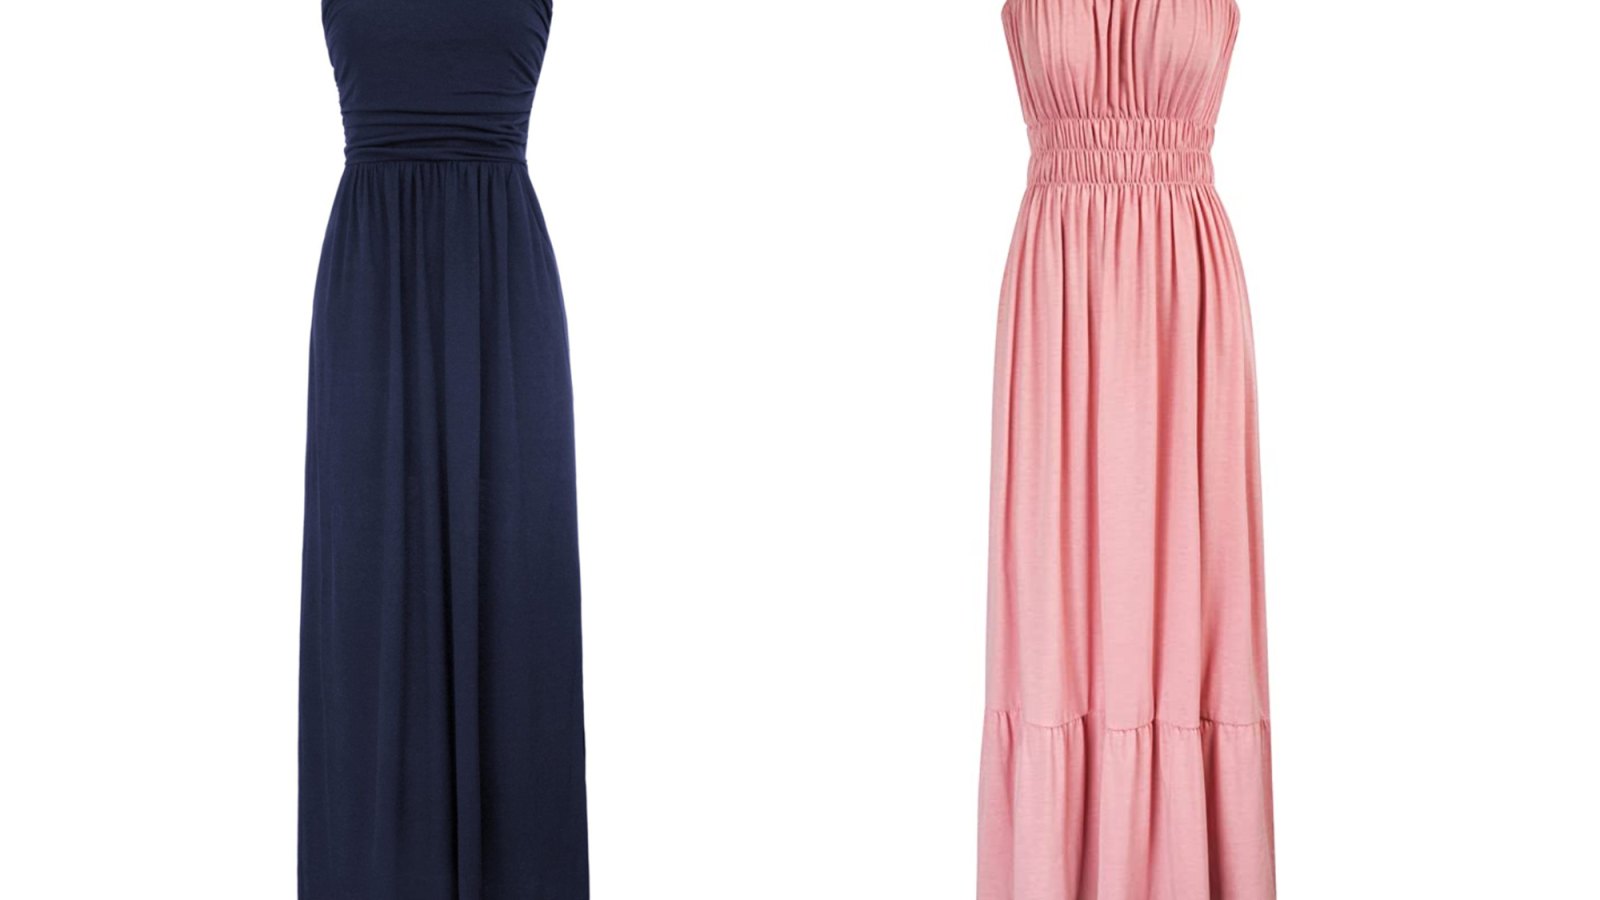 Grace Karin Strapless Maxi Dress Comes in So Many Amazing Shades